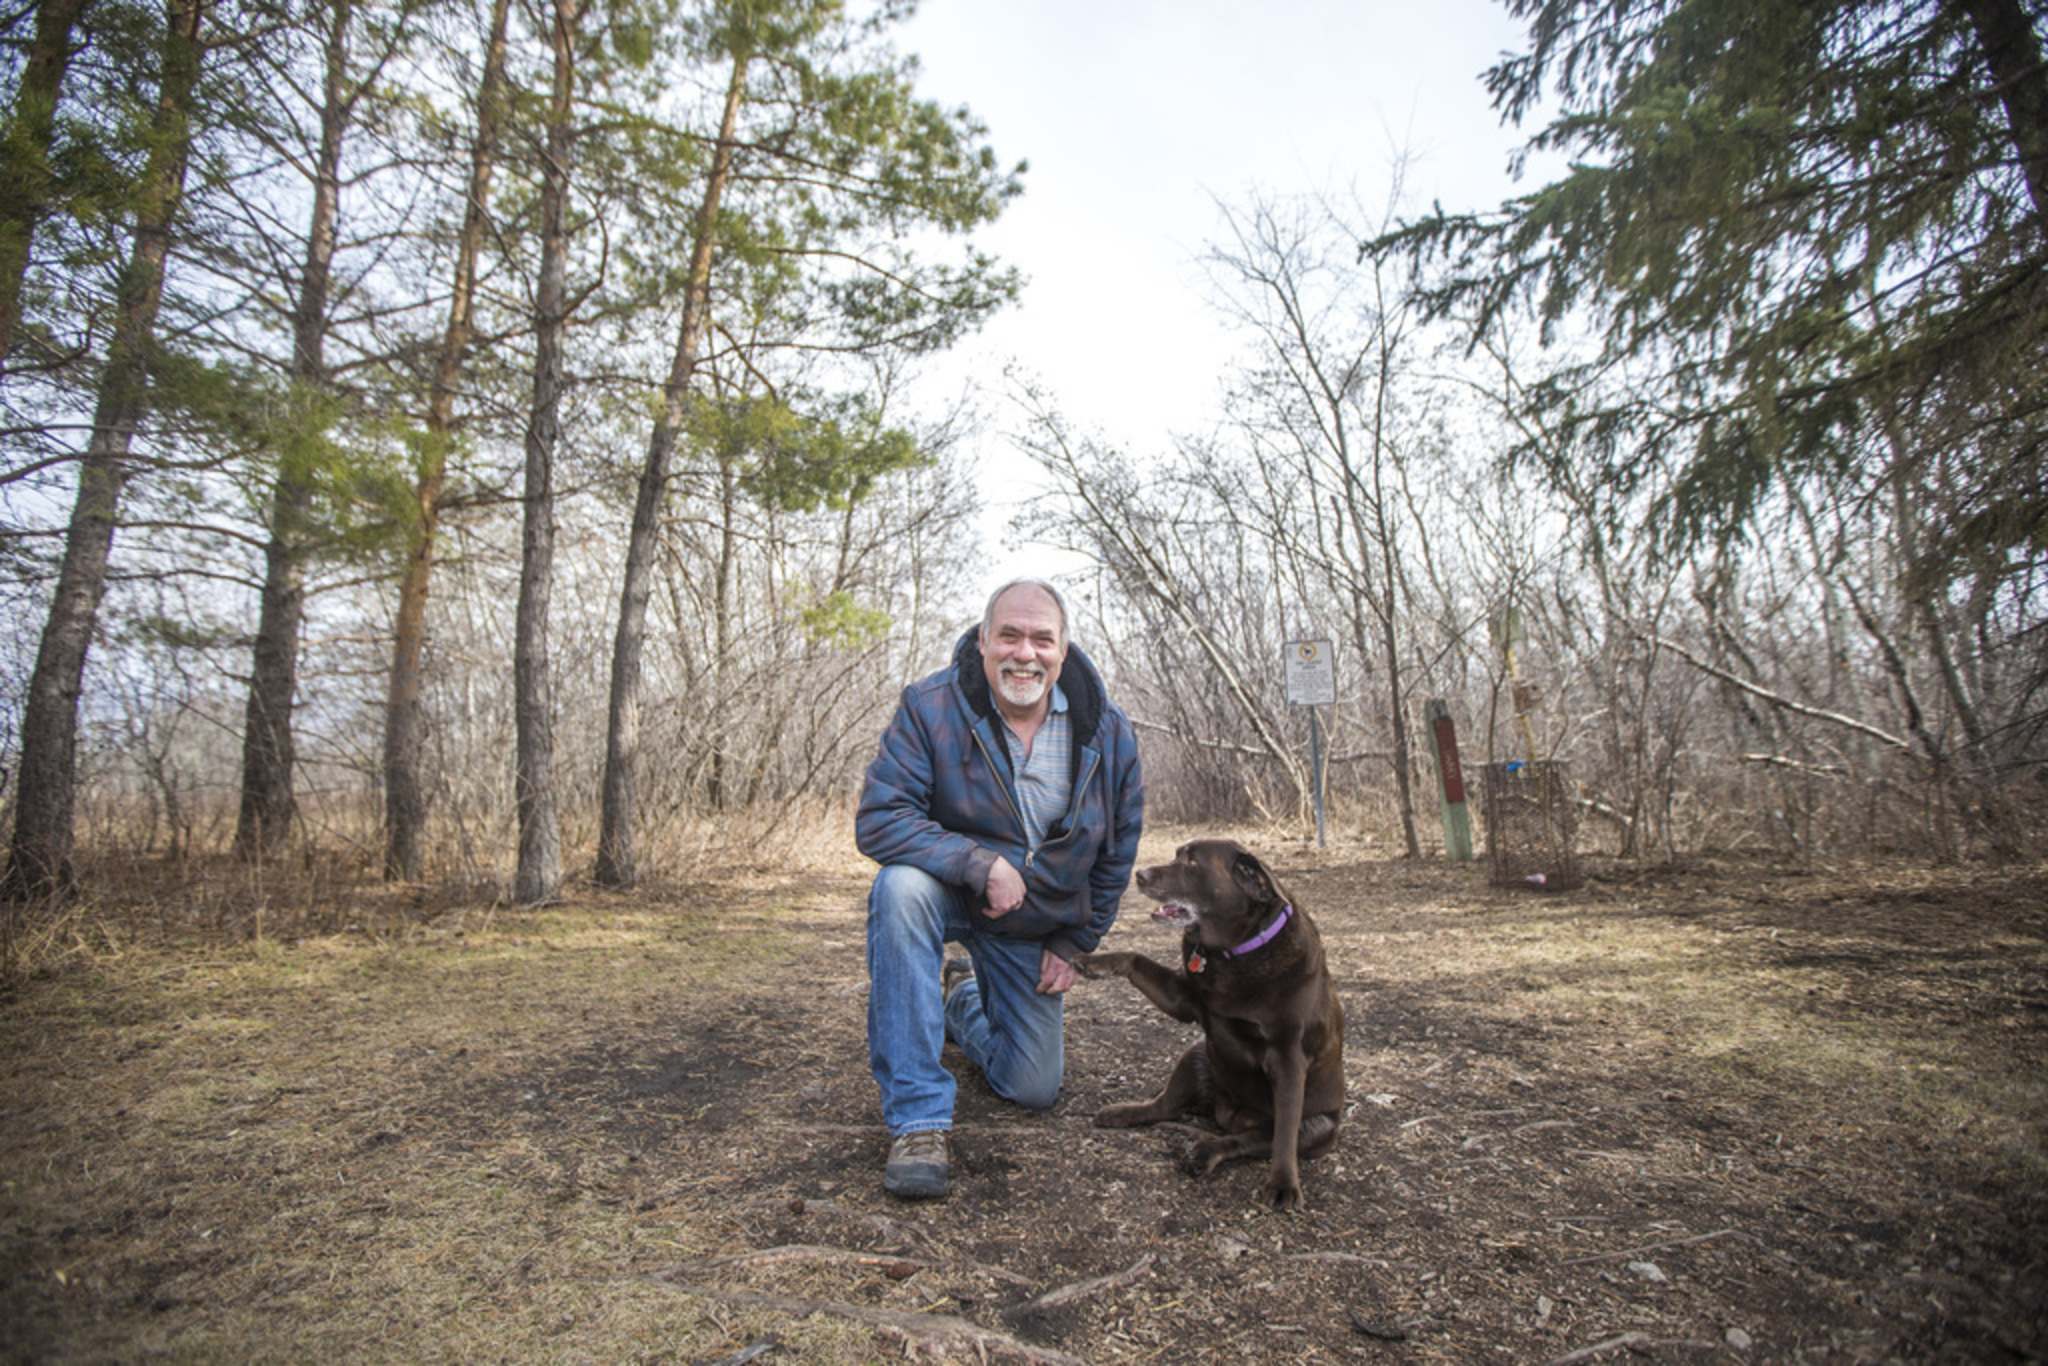 MIKAELA MACKENZIE / WINNIPEG FREE PRESS Lloyd Johnson, founder of the Little Mountain Park Pet Owners Association, poses for a portrait at the park with his dog, Sage, in Winnipeg on Friday, April 9, 2021. For Joyanne Pursaga story. Winnipeg Free Press 2020.